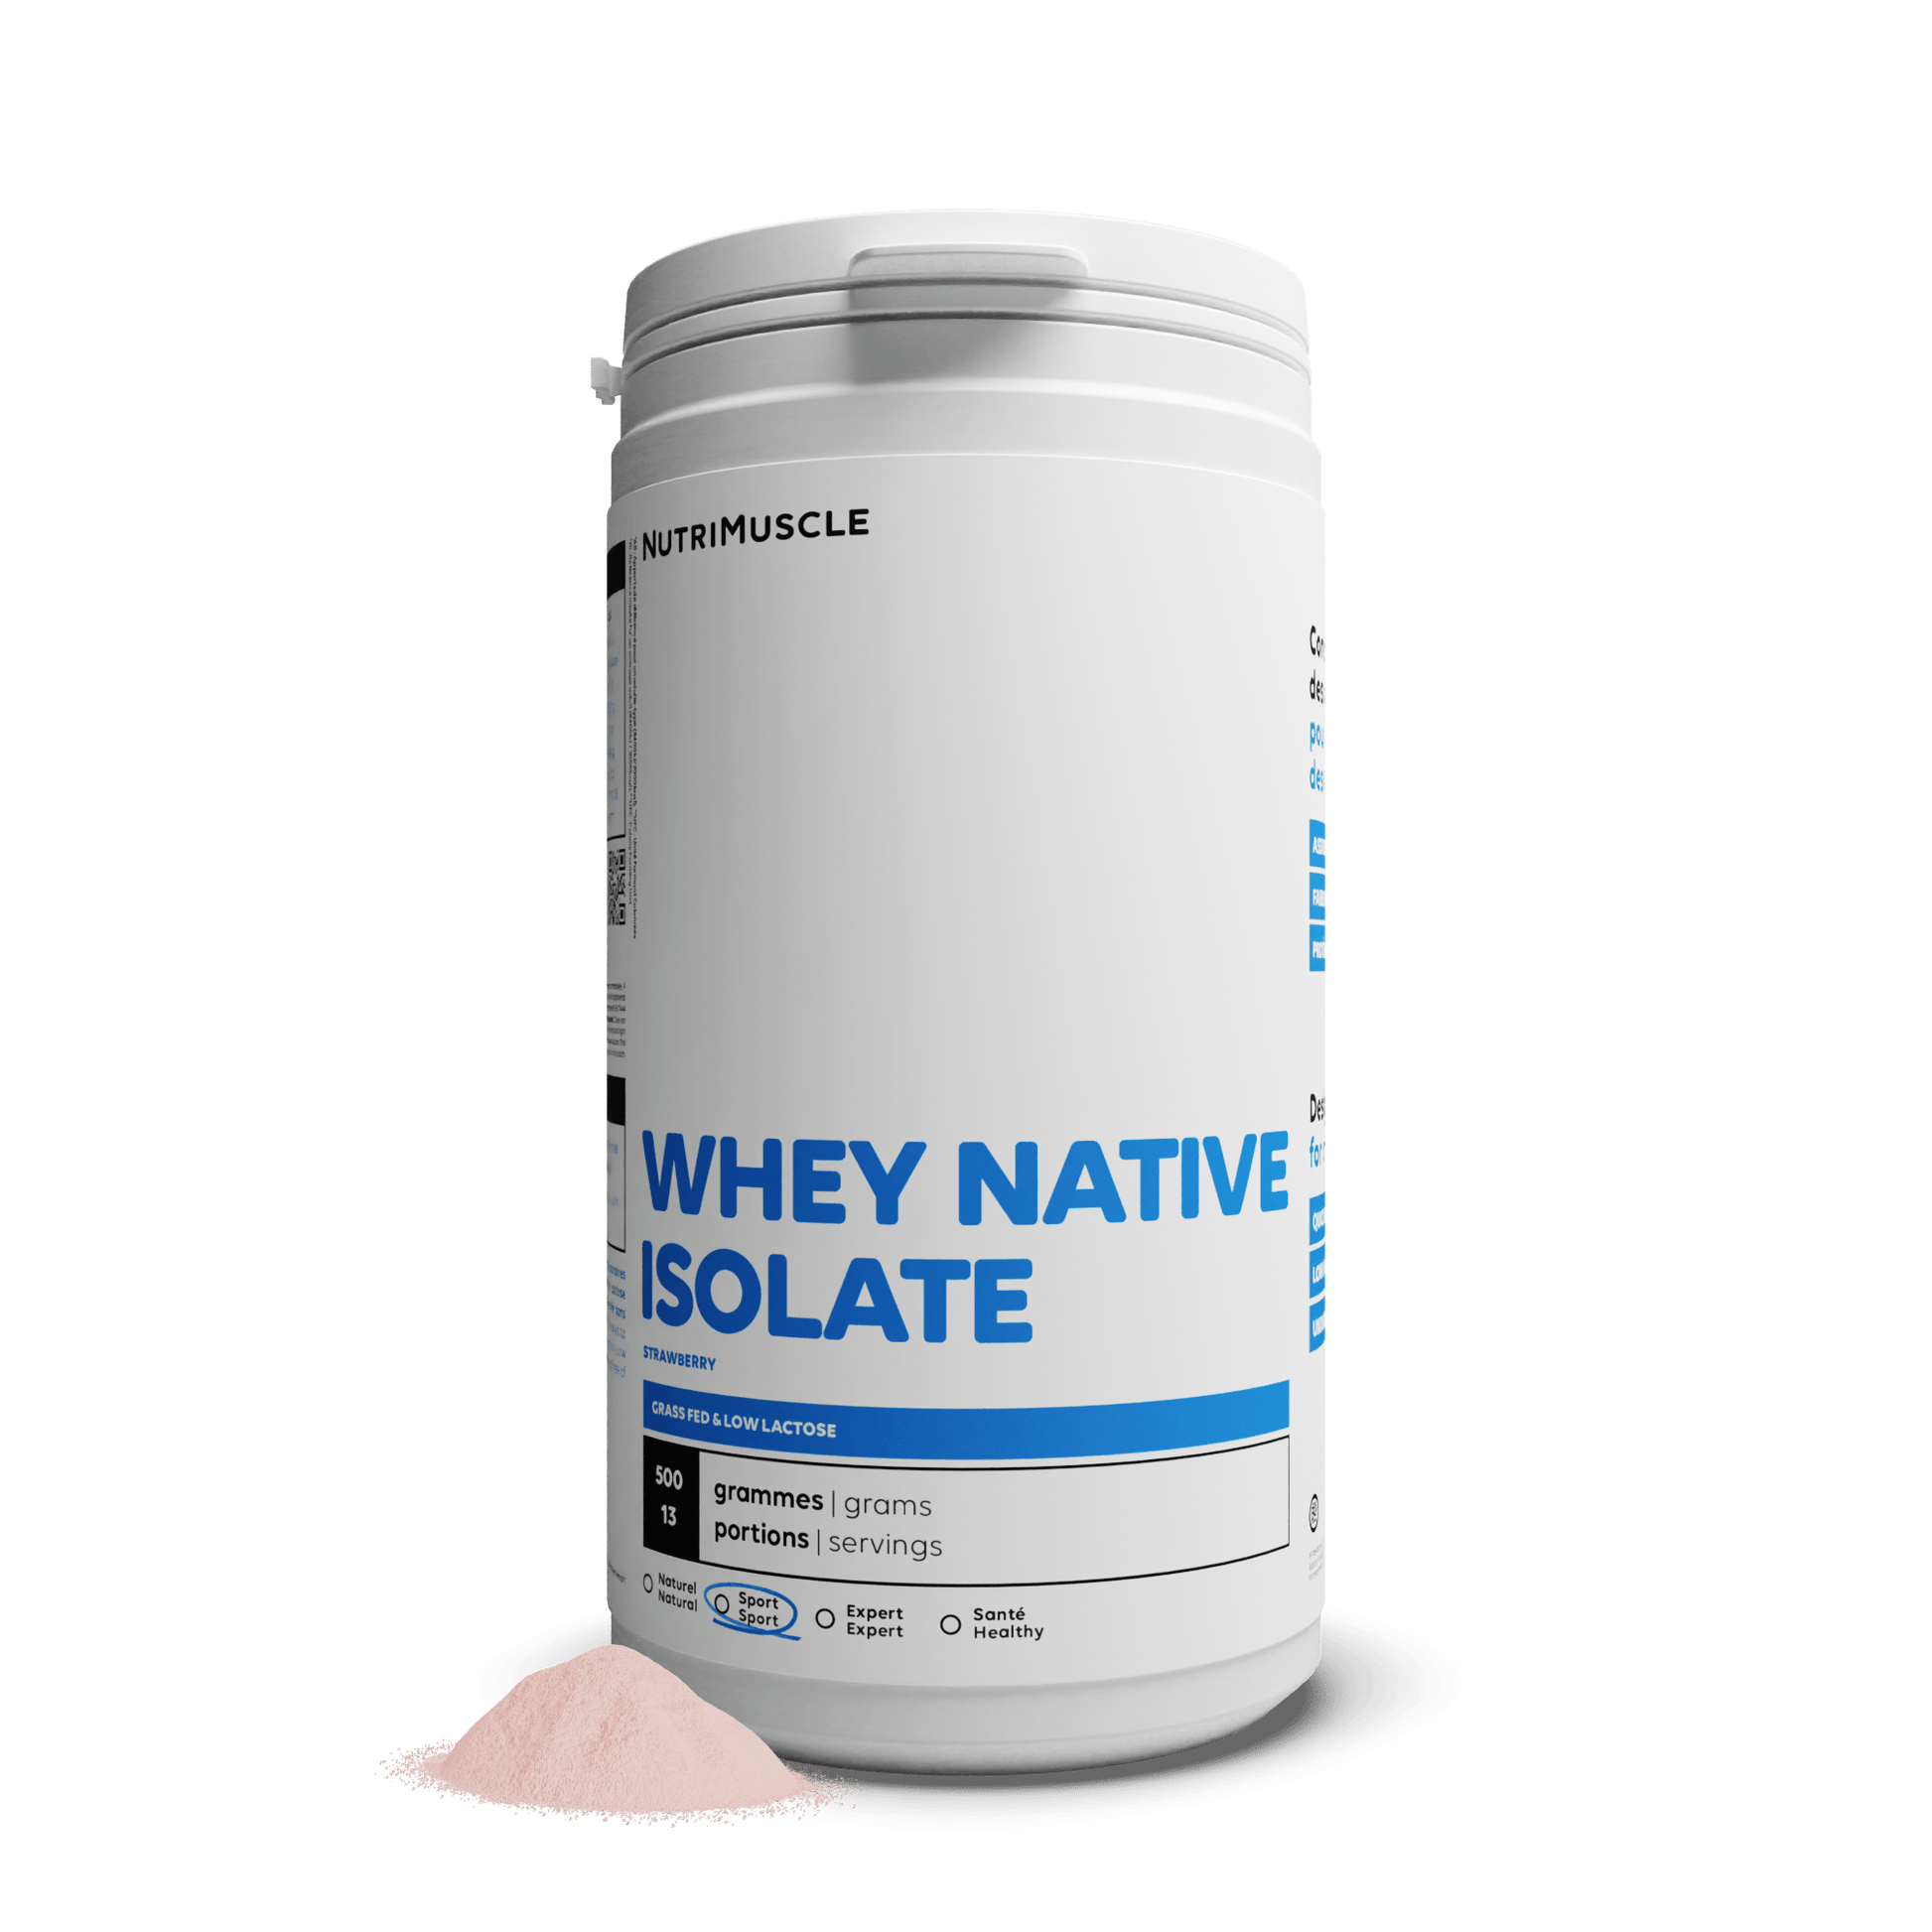 Nutrimuscle Protéines Fraise / 500 g Whey Native Isolate (Low lactose)